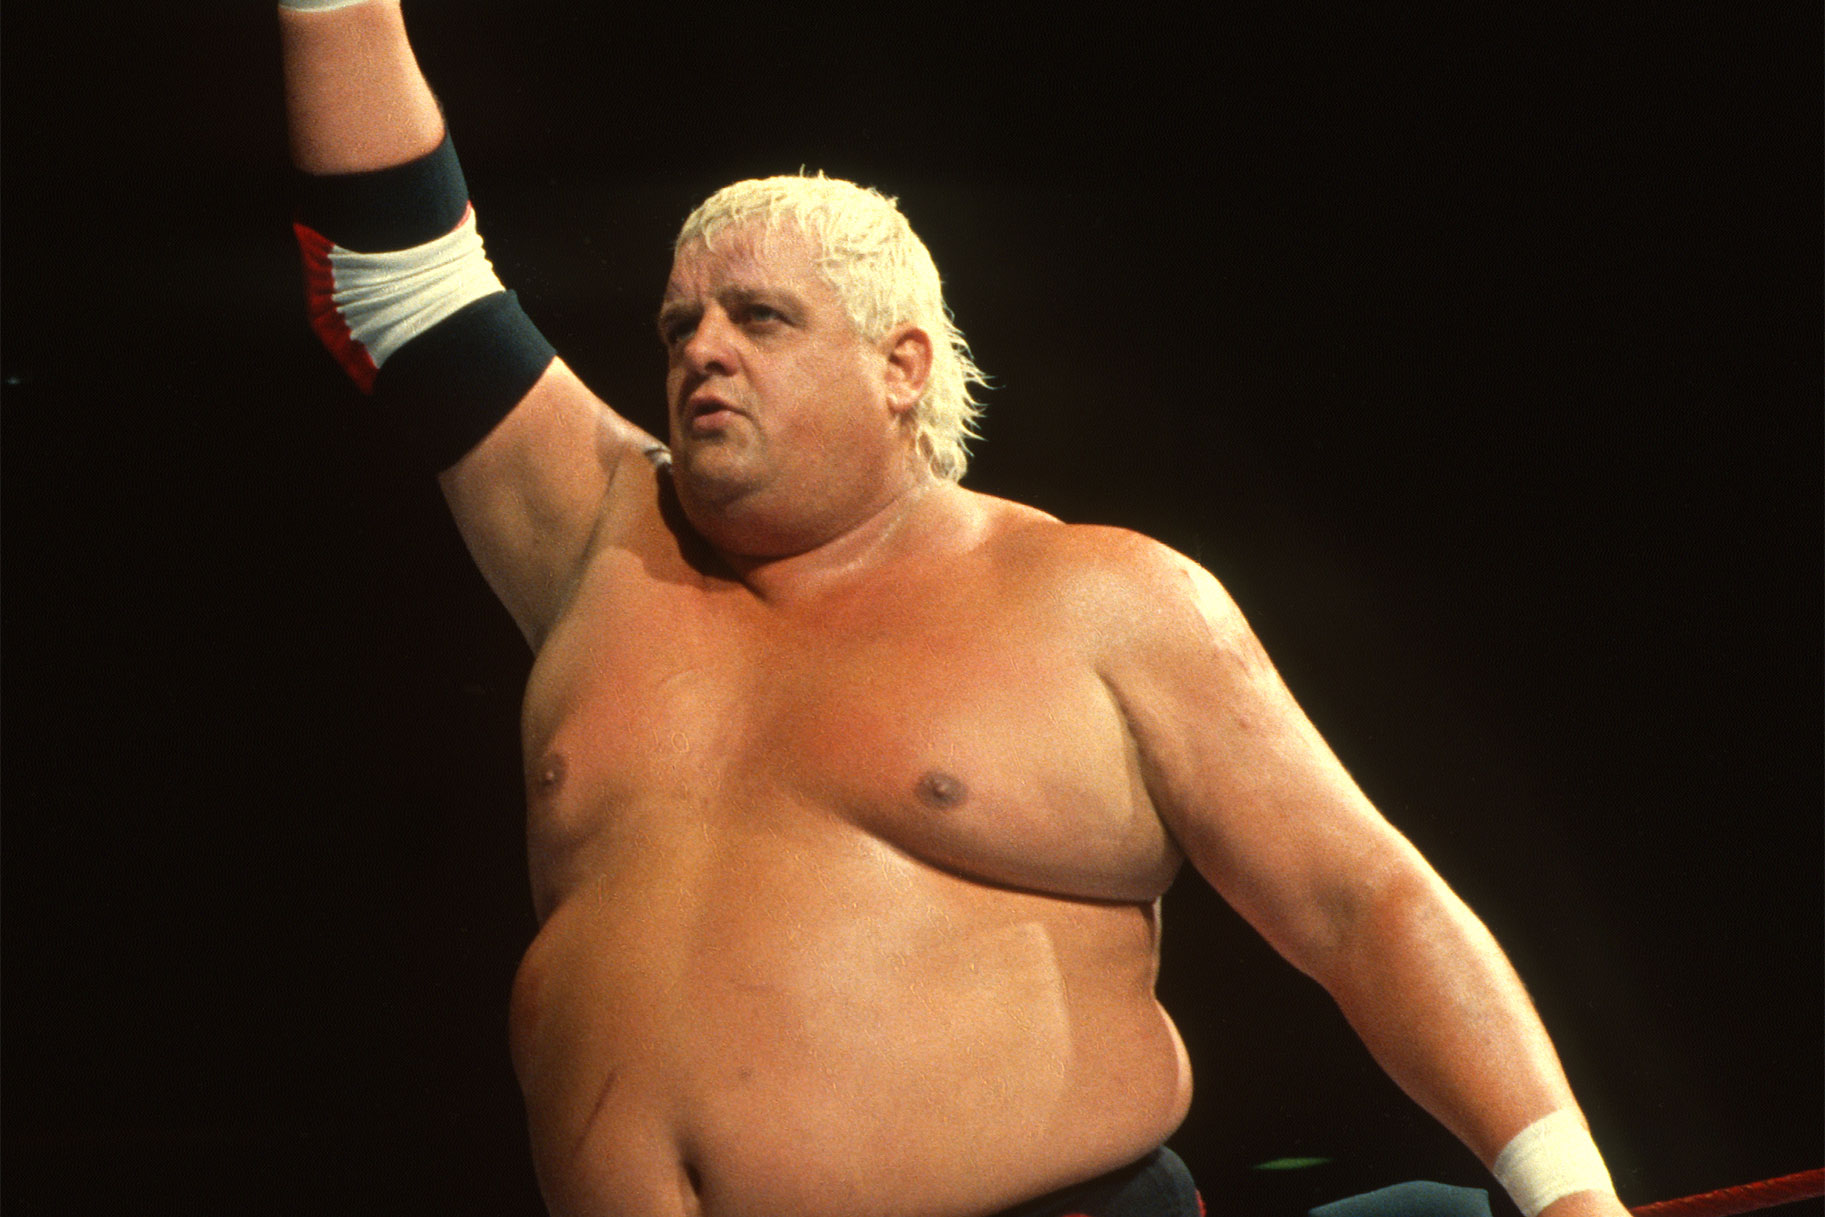 Dusty Rhodes puts his arm in the air during a match